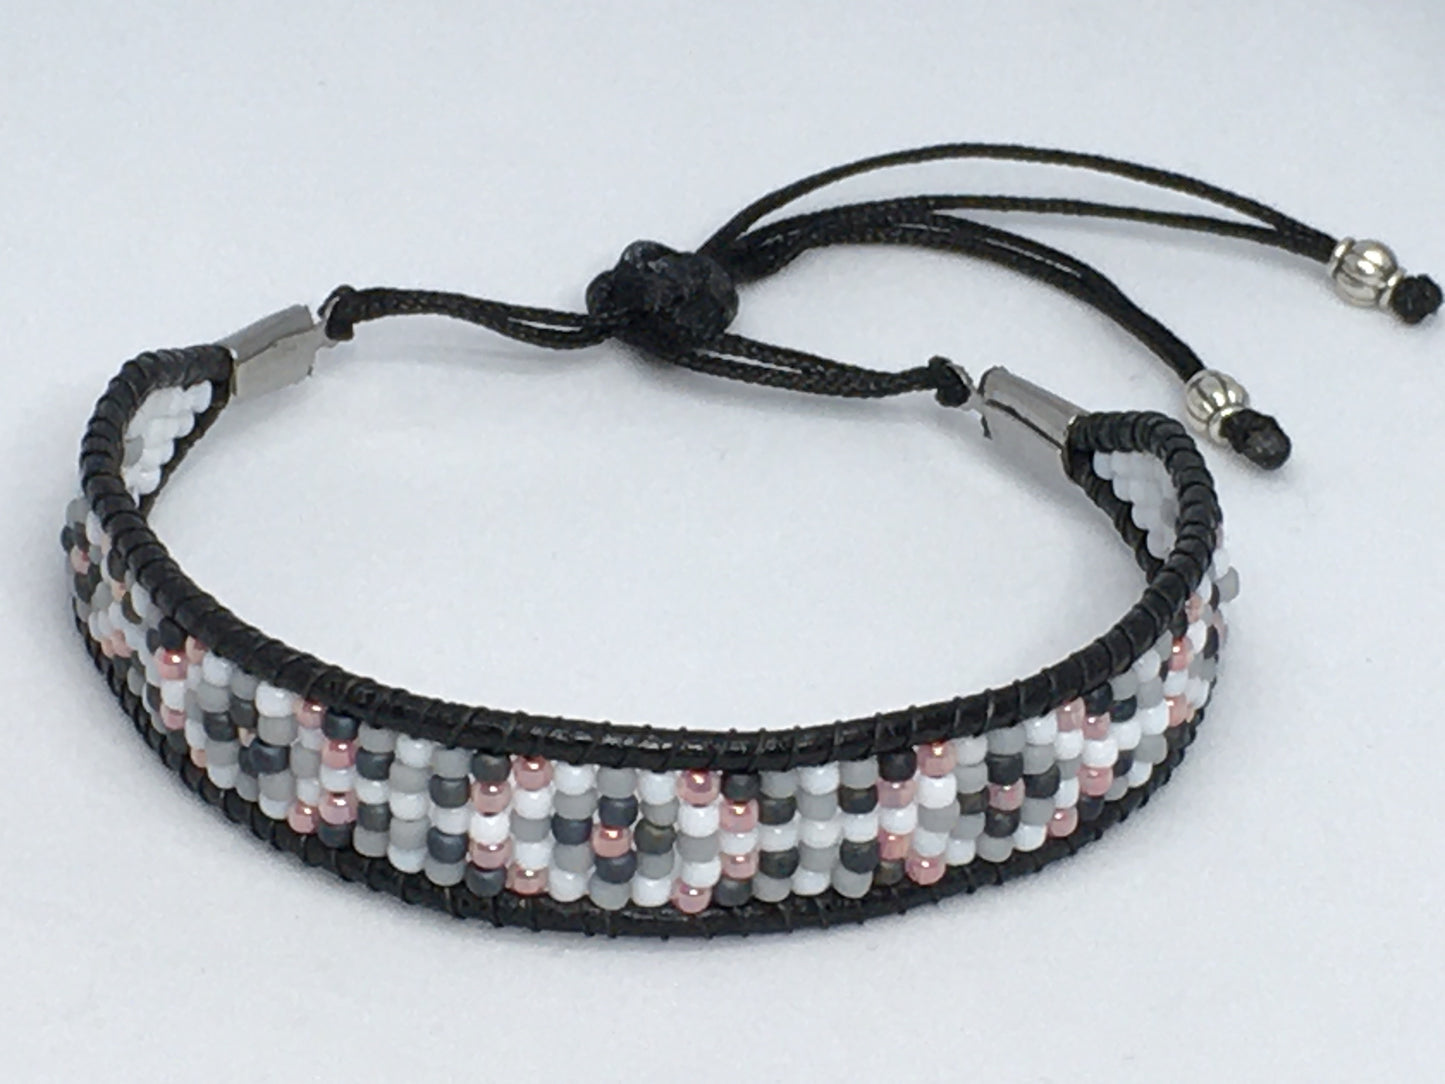 6.25" Bead and Leather Women's Bracelet